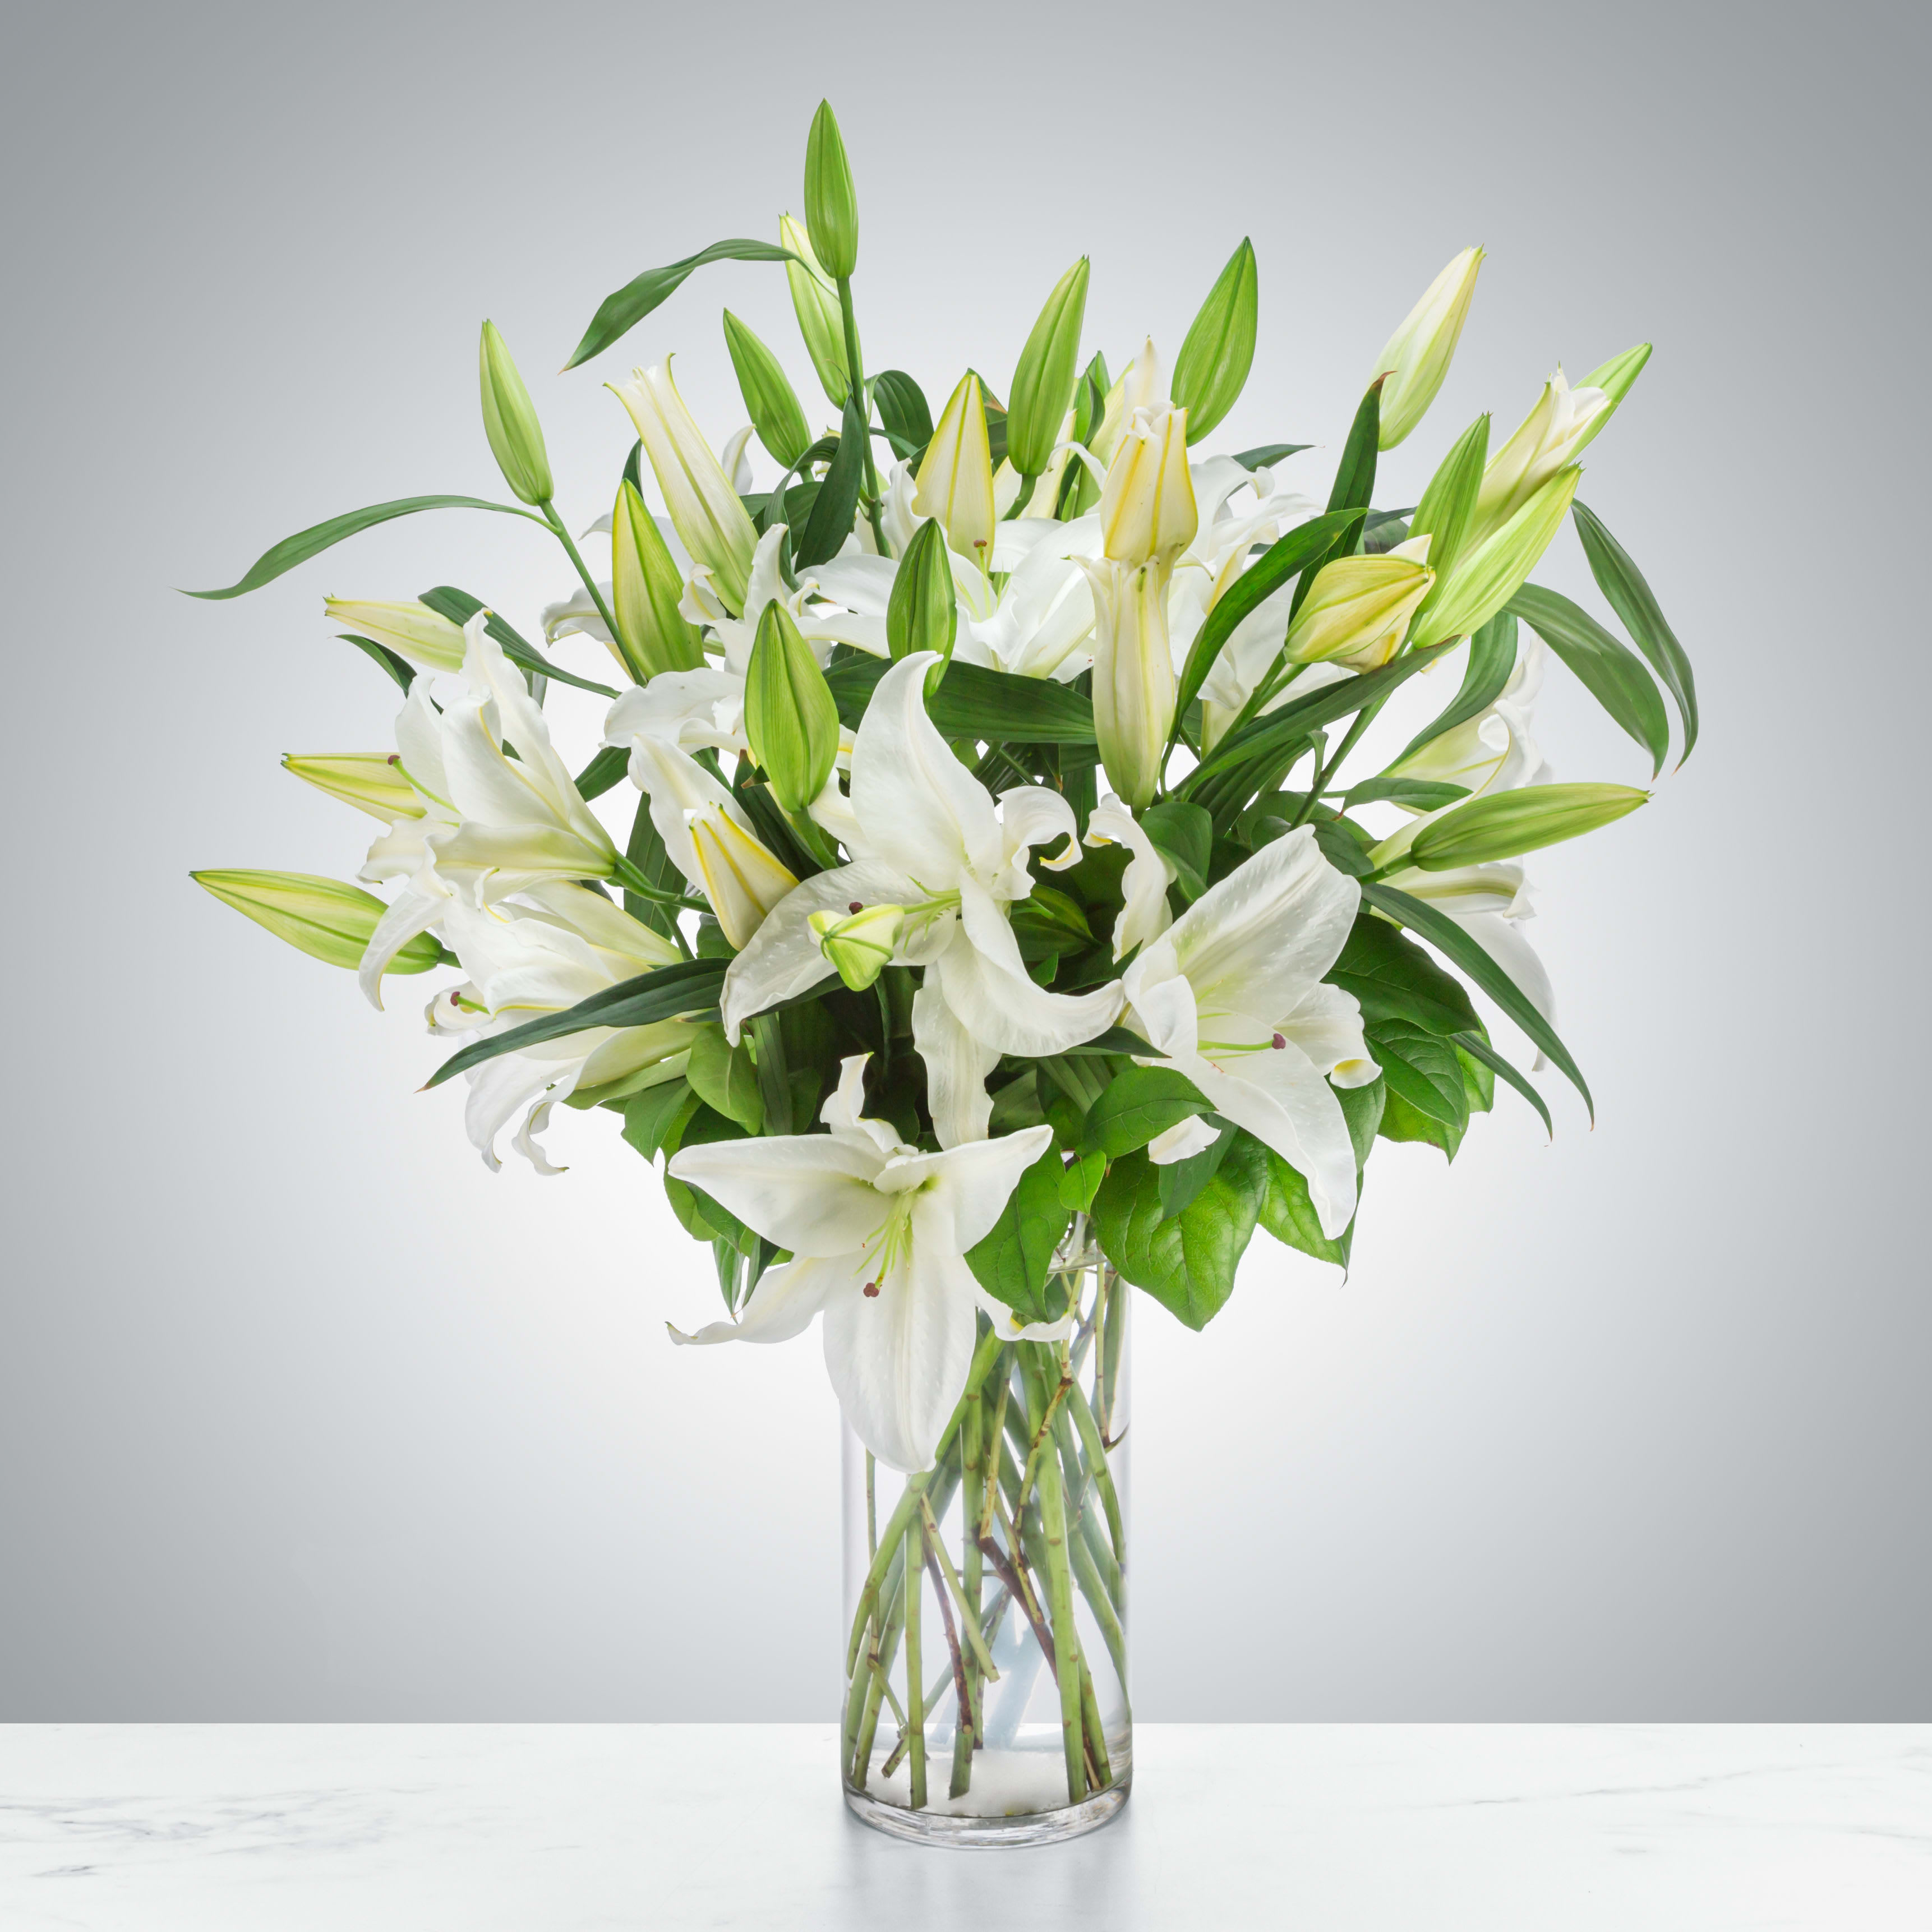 Peaceful Evening  - White lilies stand tall and beautiful. Send an impactful gift to somebody whether it be for saying I am sorry or celebrating the new year. This arrangement instantly elevates any room and fills the space with that distinct sweet-smelling lily perfume. 